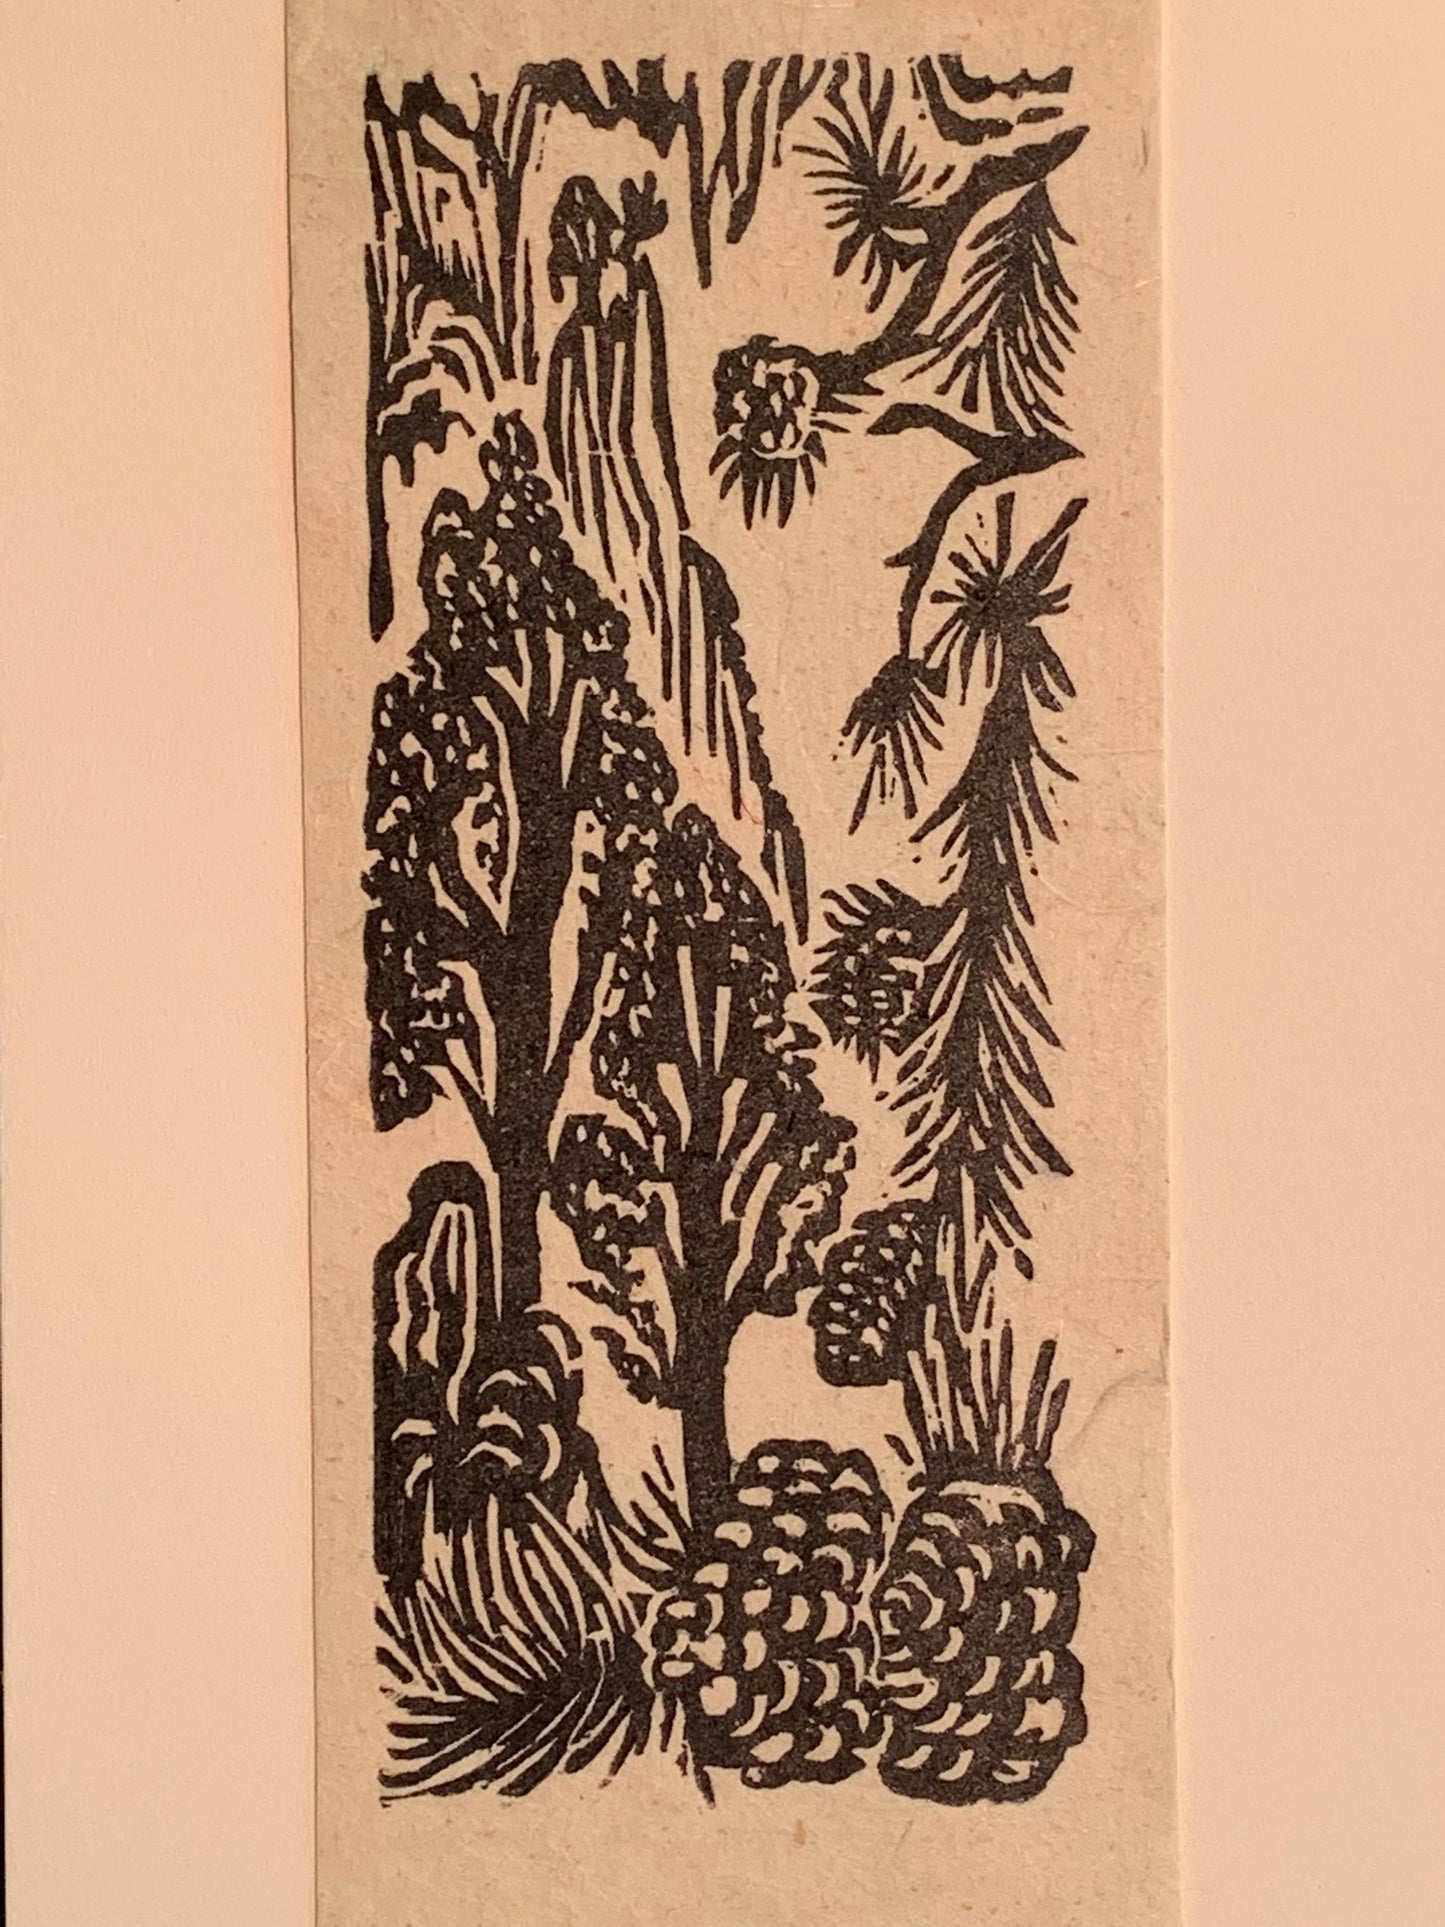 Pinyon Pine Nut Tree Small Original Woodcut from Alpine Mountain Trees Landscape Collection